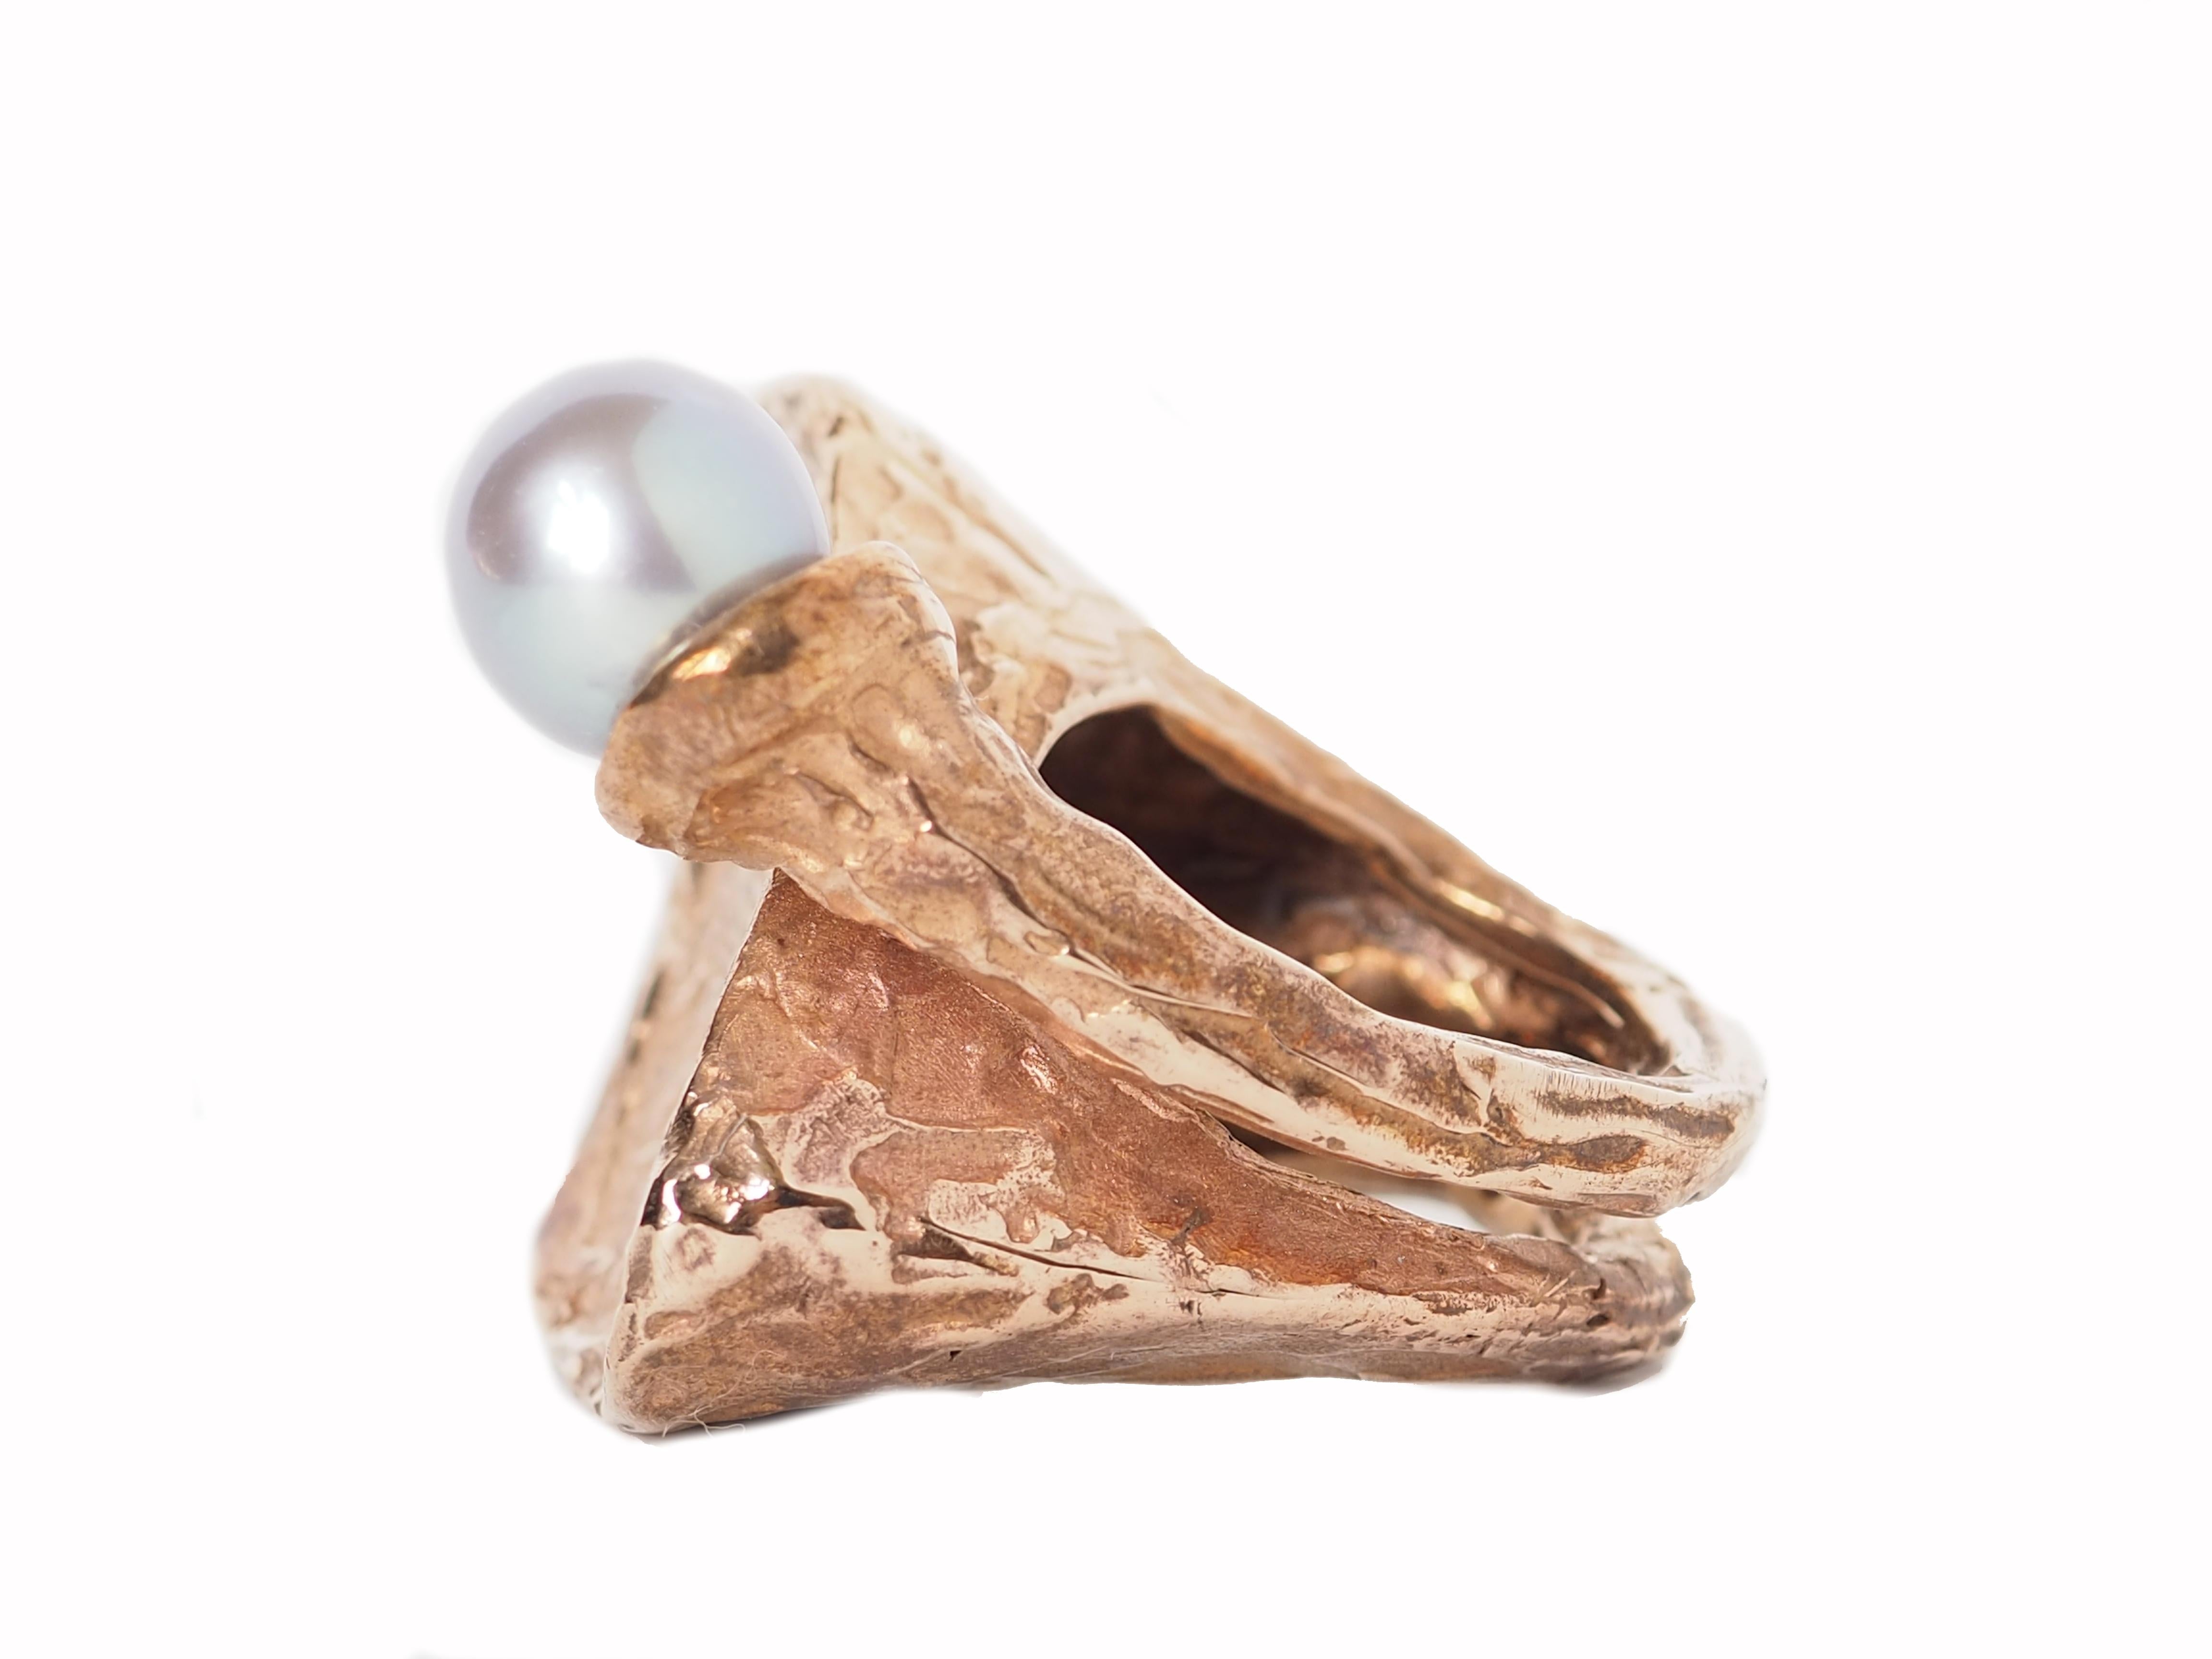 Sculpture ring made by hand in bronze with a grey natural pearl size 14 eu.
All Giulia Colussi jewelry is new and has never been previously owned or worn. Each item will arrive at your door beautifully gift wrapped in our boxes, put inside an